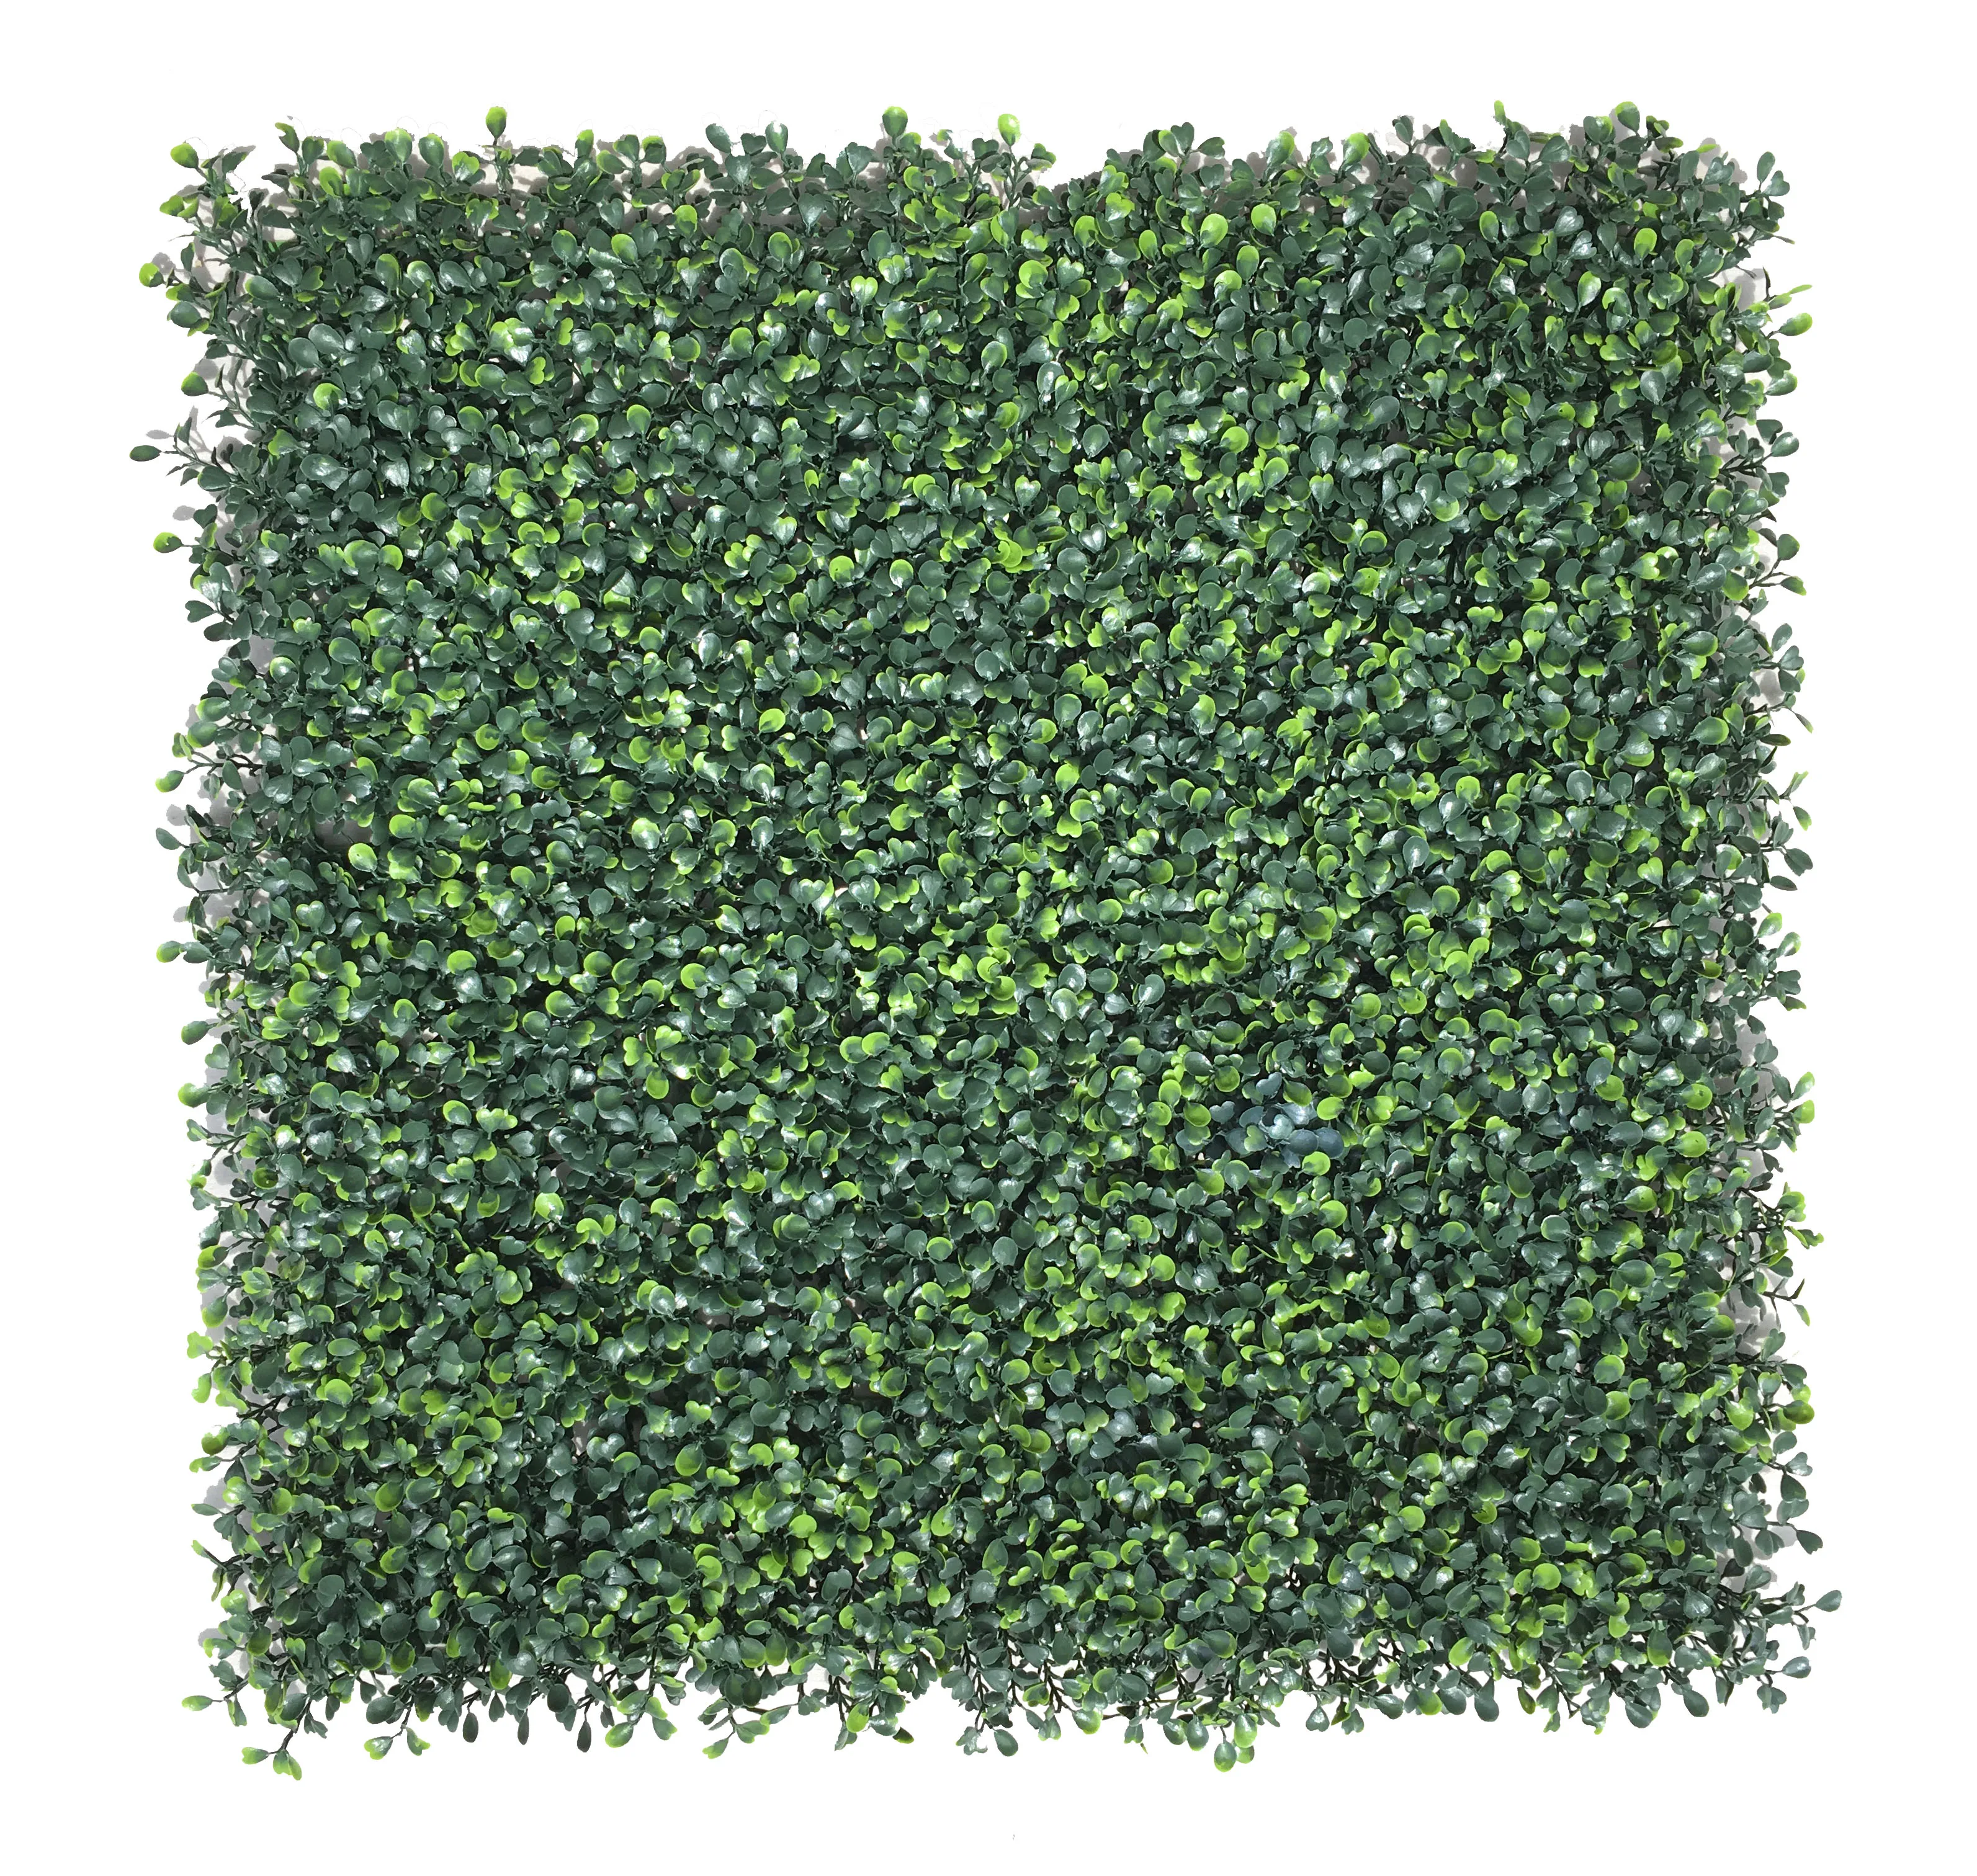 

50*50cm plastic greenery artificial boxwood hedge fence panels mat green wall for Garden Decoration parede verde